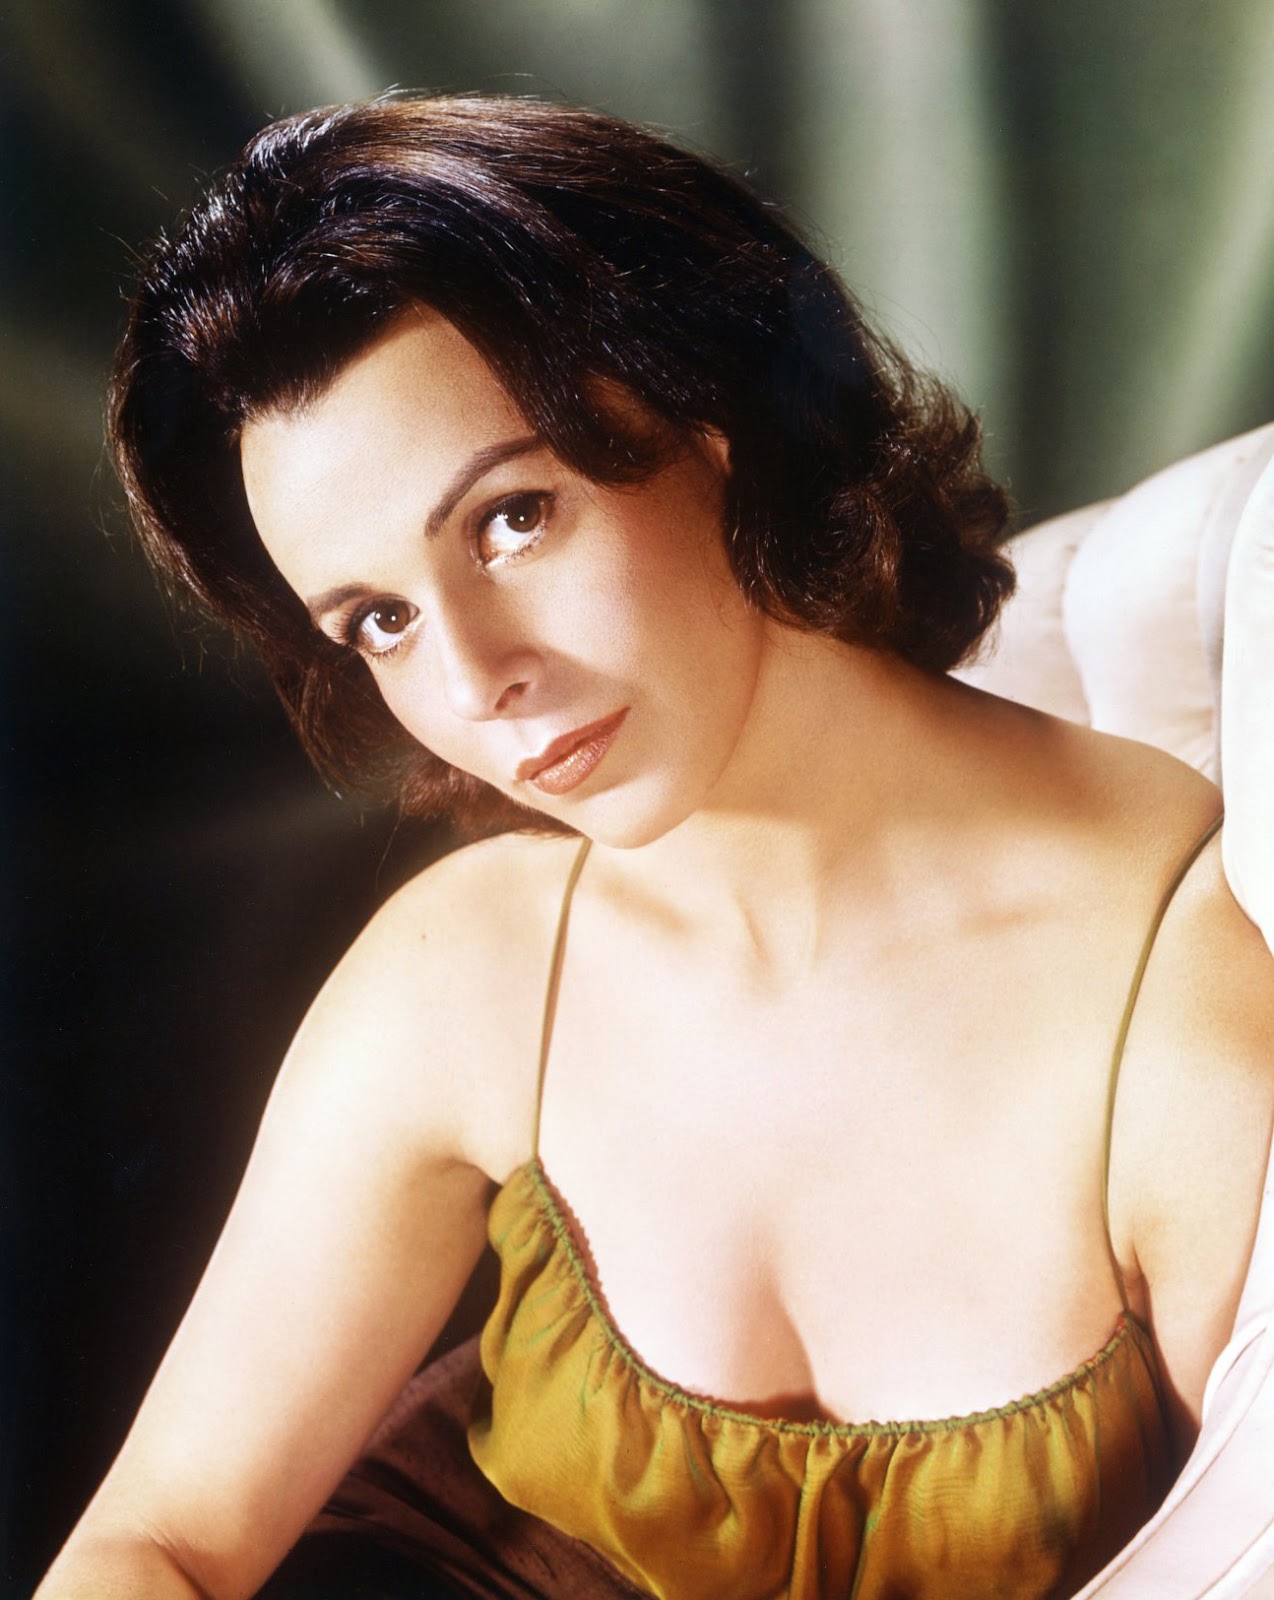 DRAGON: Claire Bloom / 'There's more to life than men'